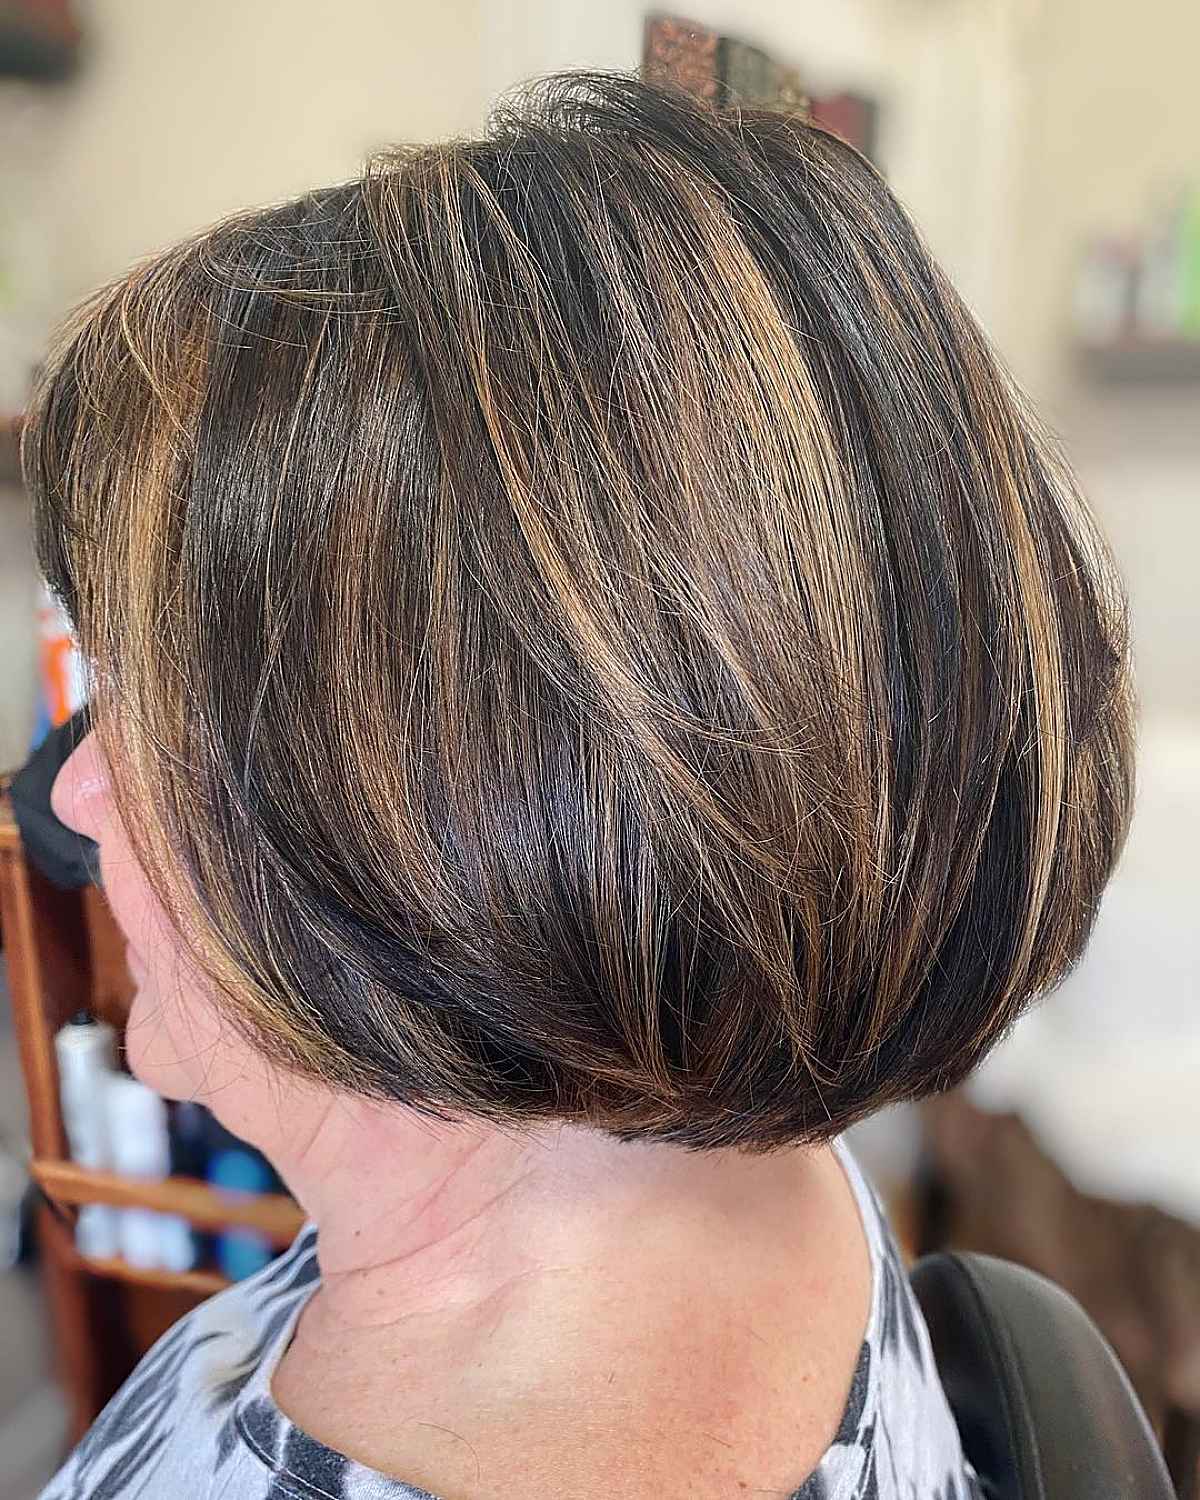 The modified wedge haircut for women 60+